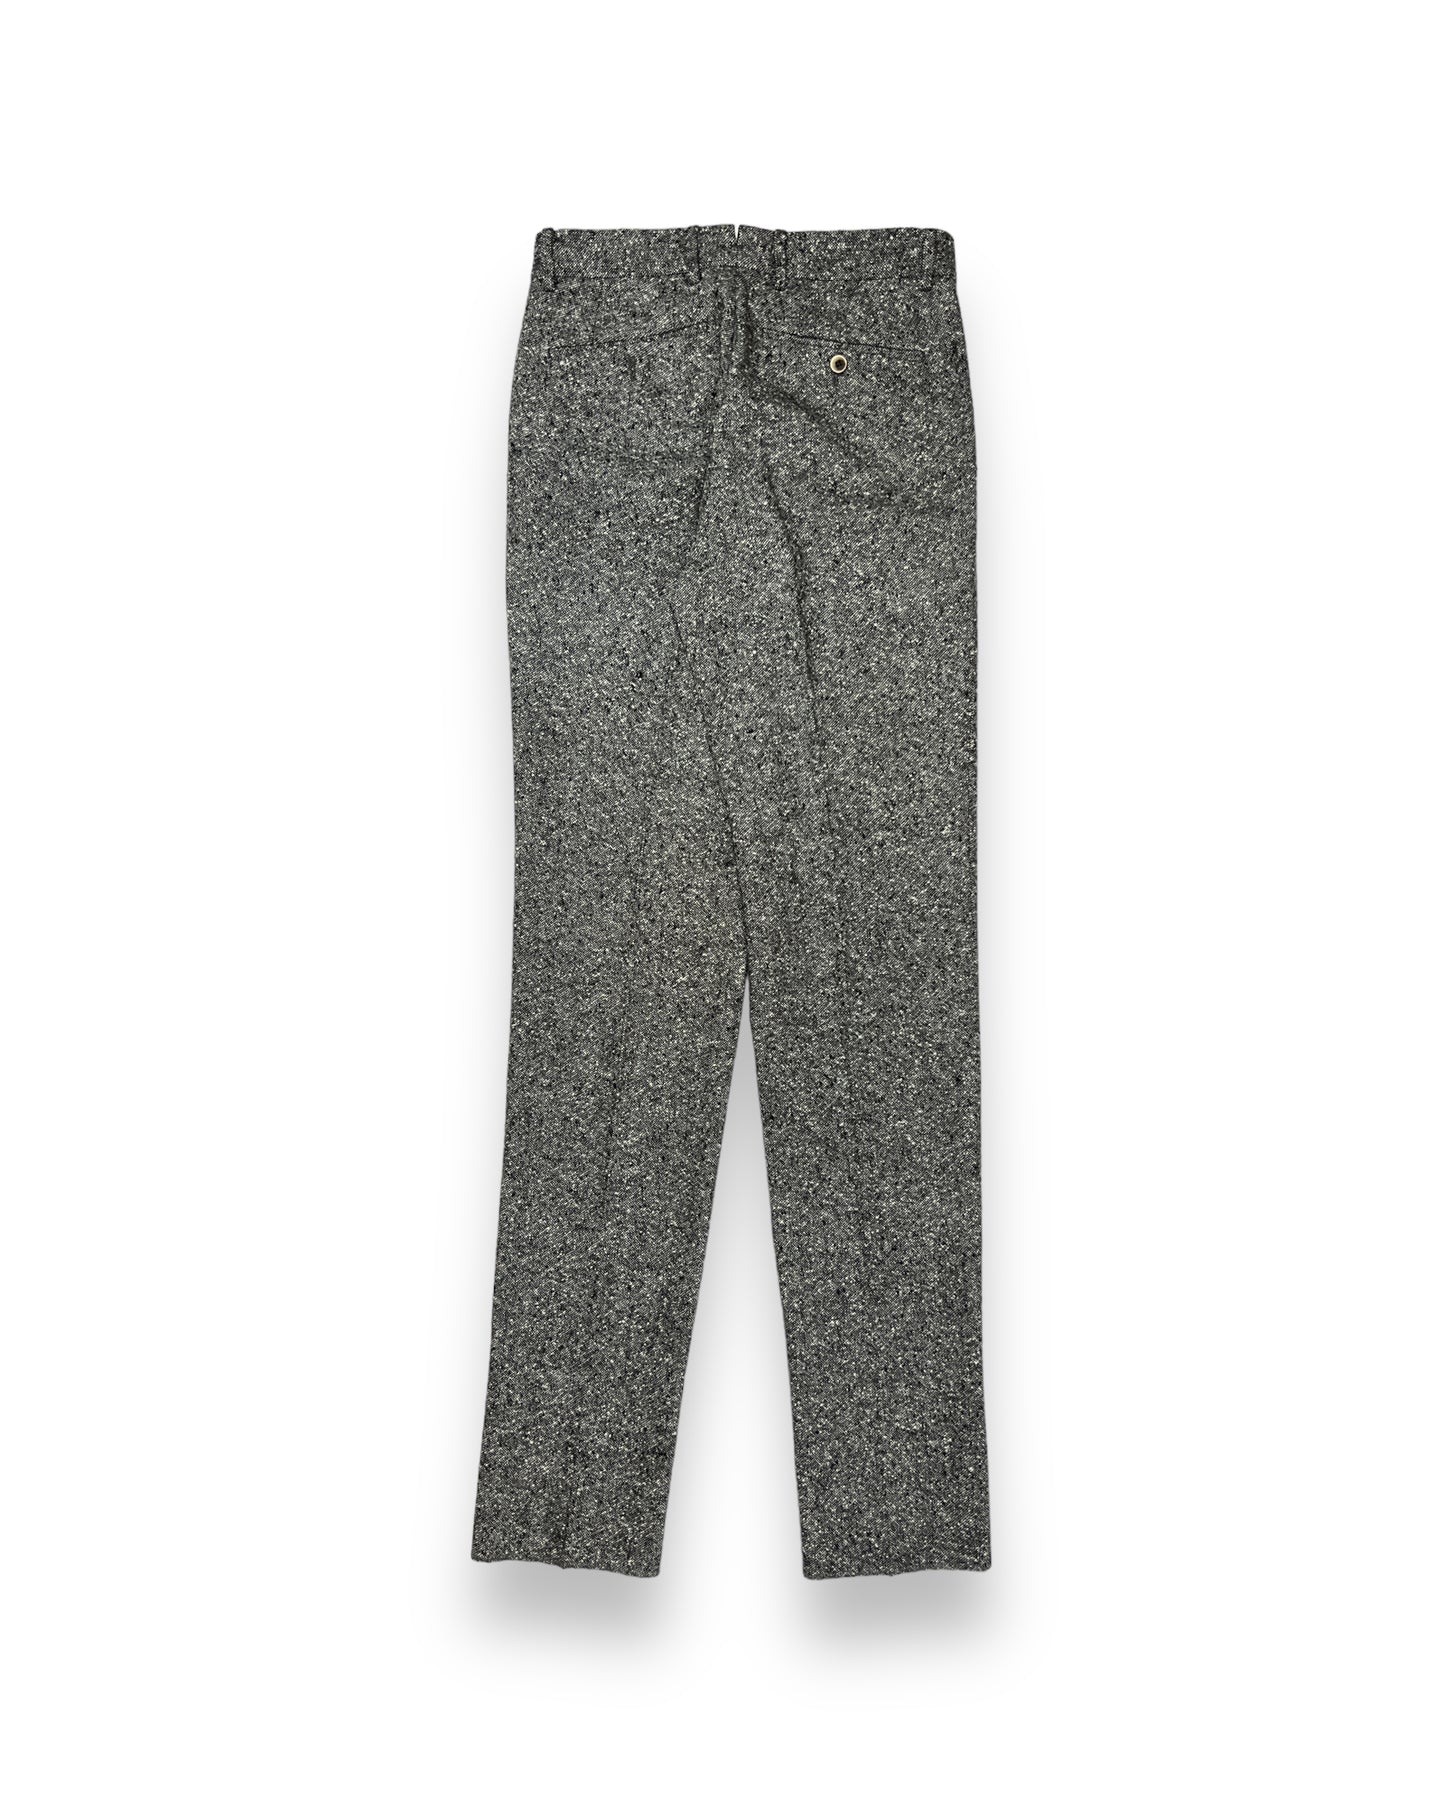 PLEATED PANT IN HOMESPUN